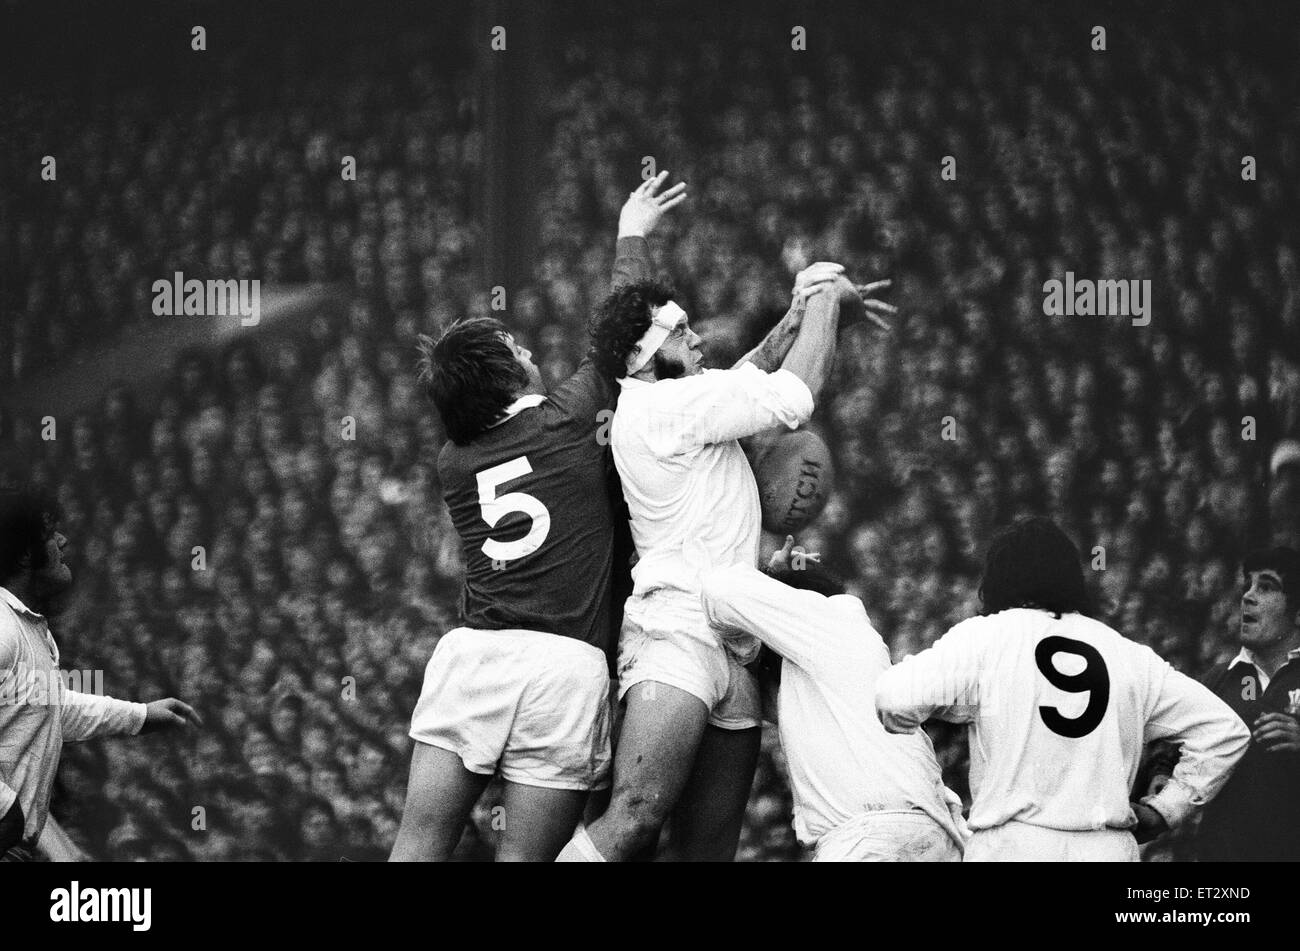 England 9-21 Wales, Rugby Union, Five Nations Championship match at Twickenham, 17th January 1976. Stock Photo